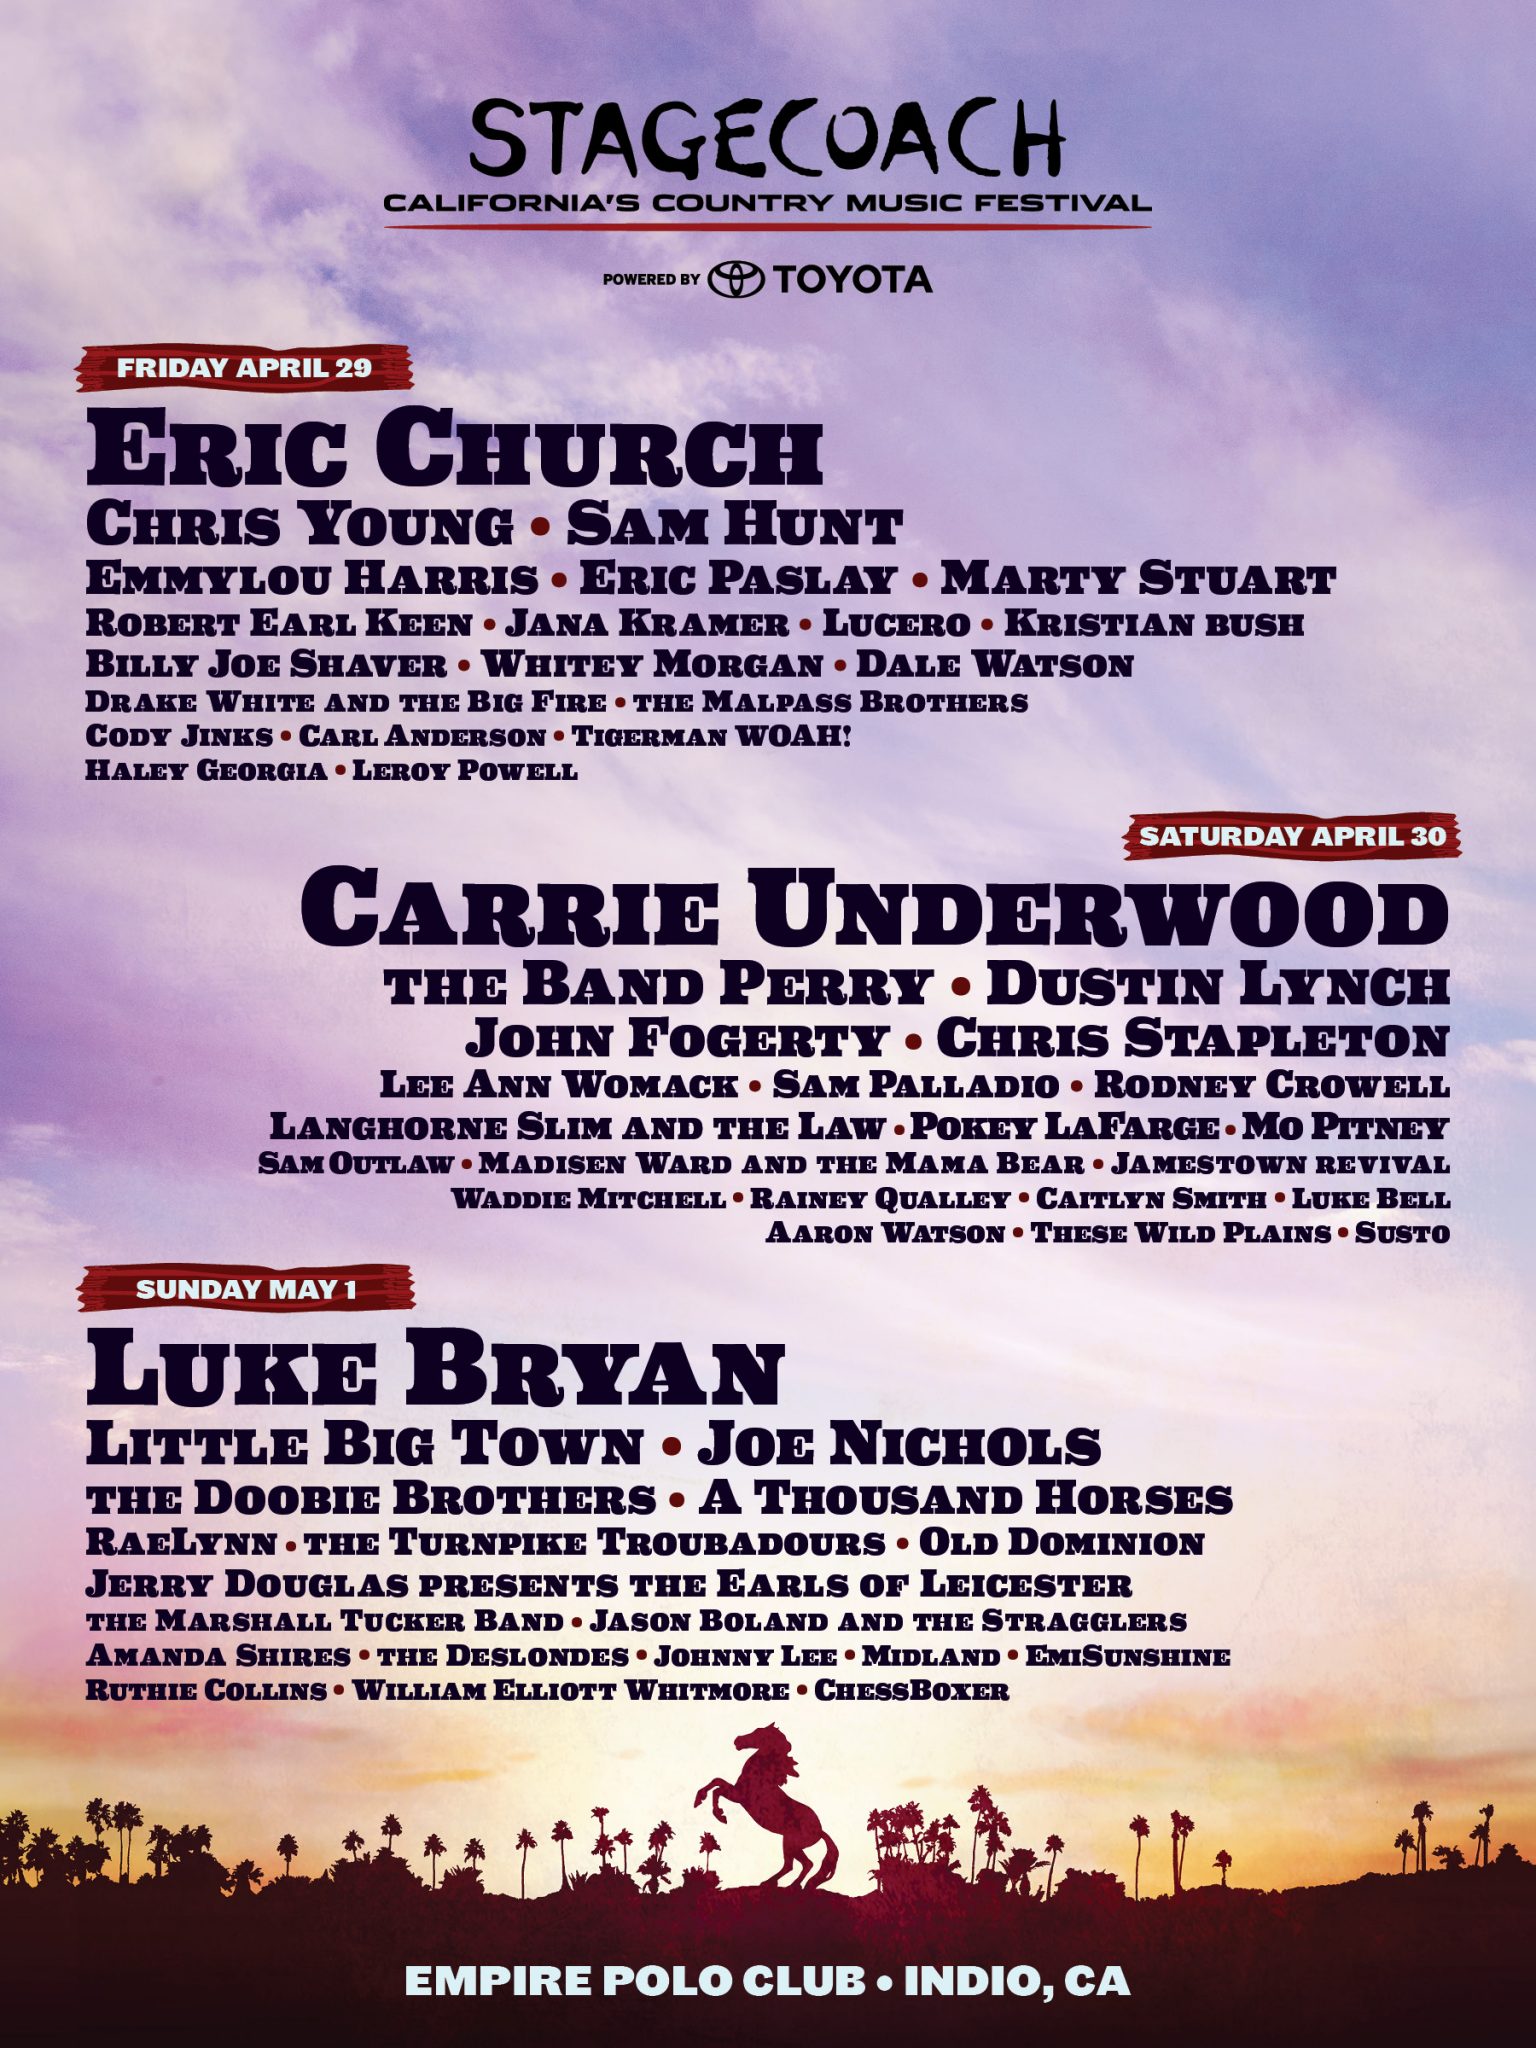 The Stagecoach 2016 Lineup is Here | Cactus Hugs